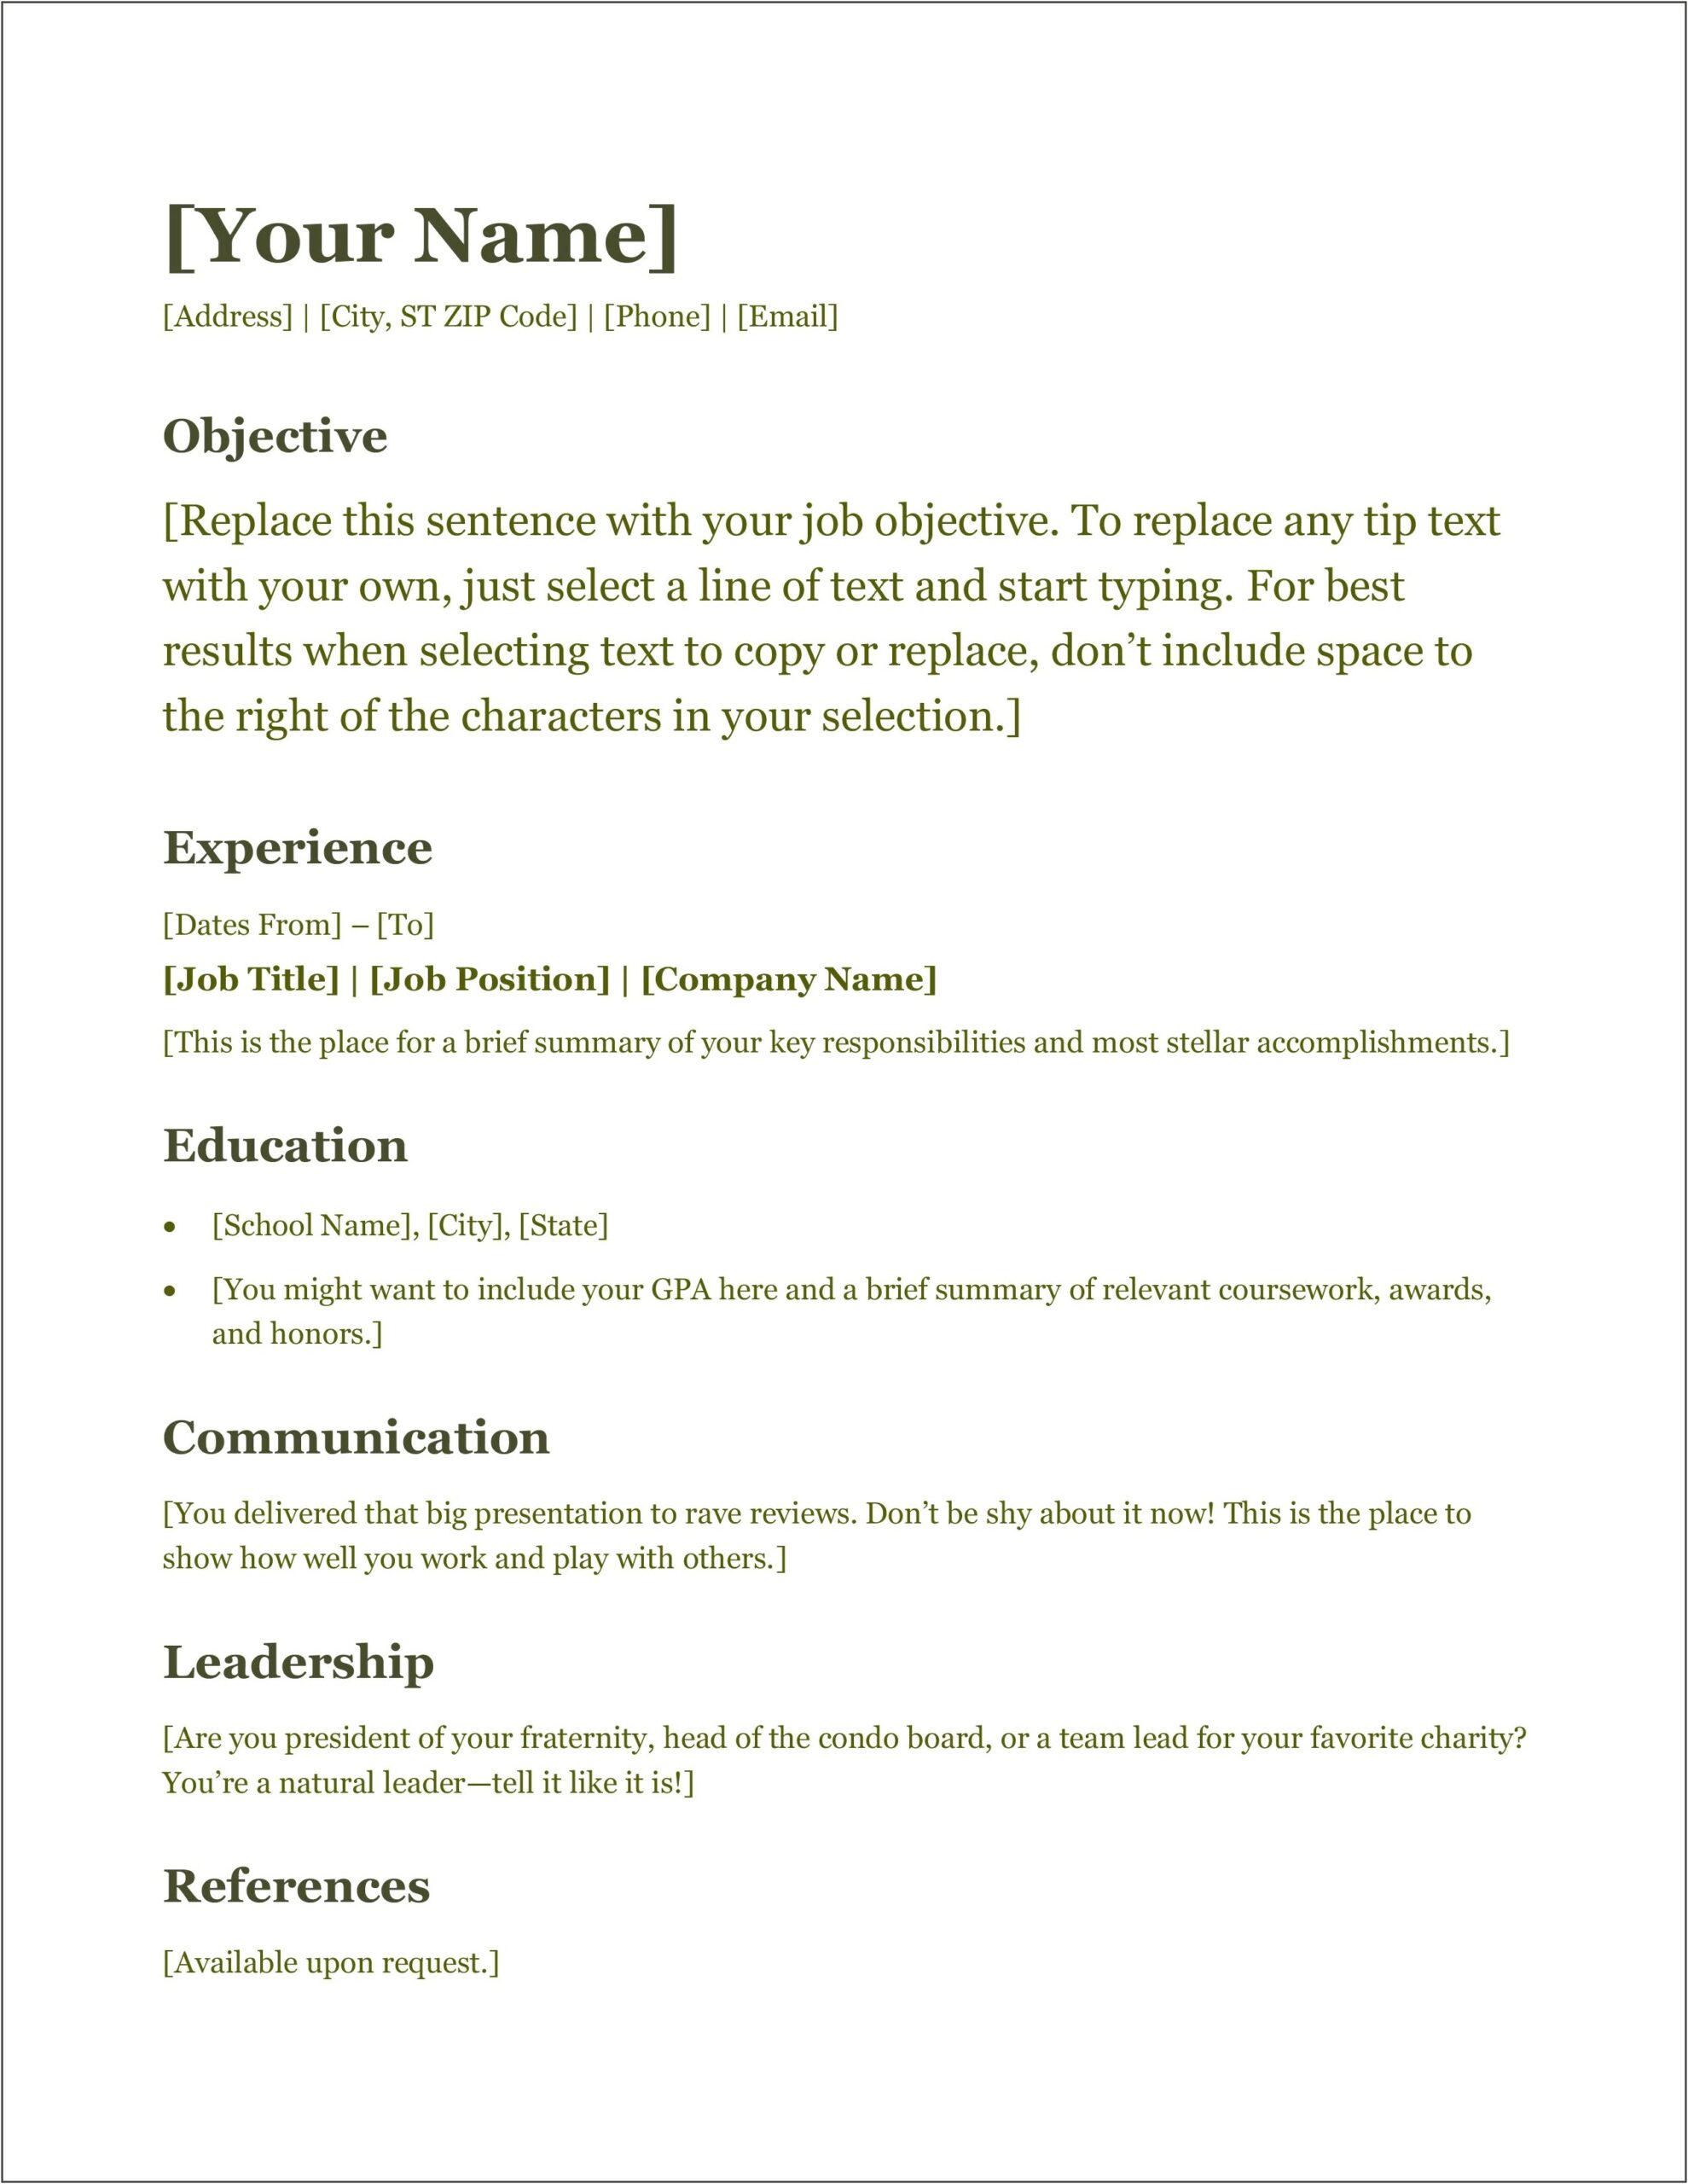 Microsoft Office Word Resume Templates Free Download